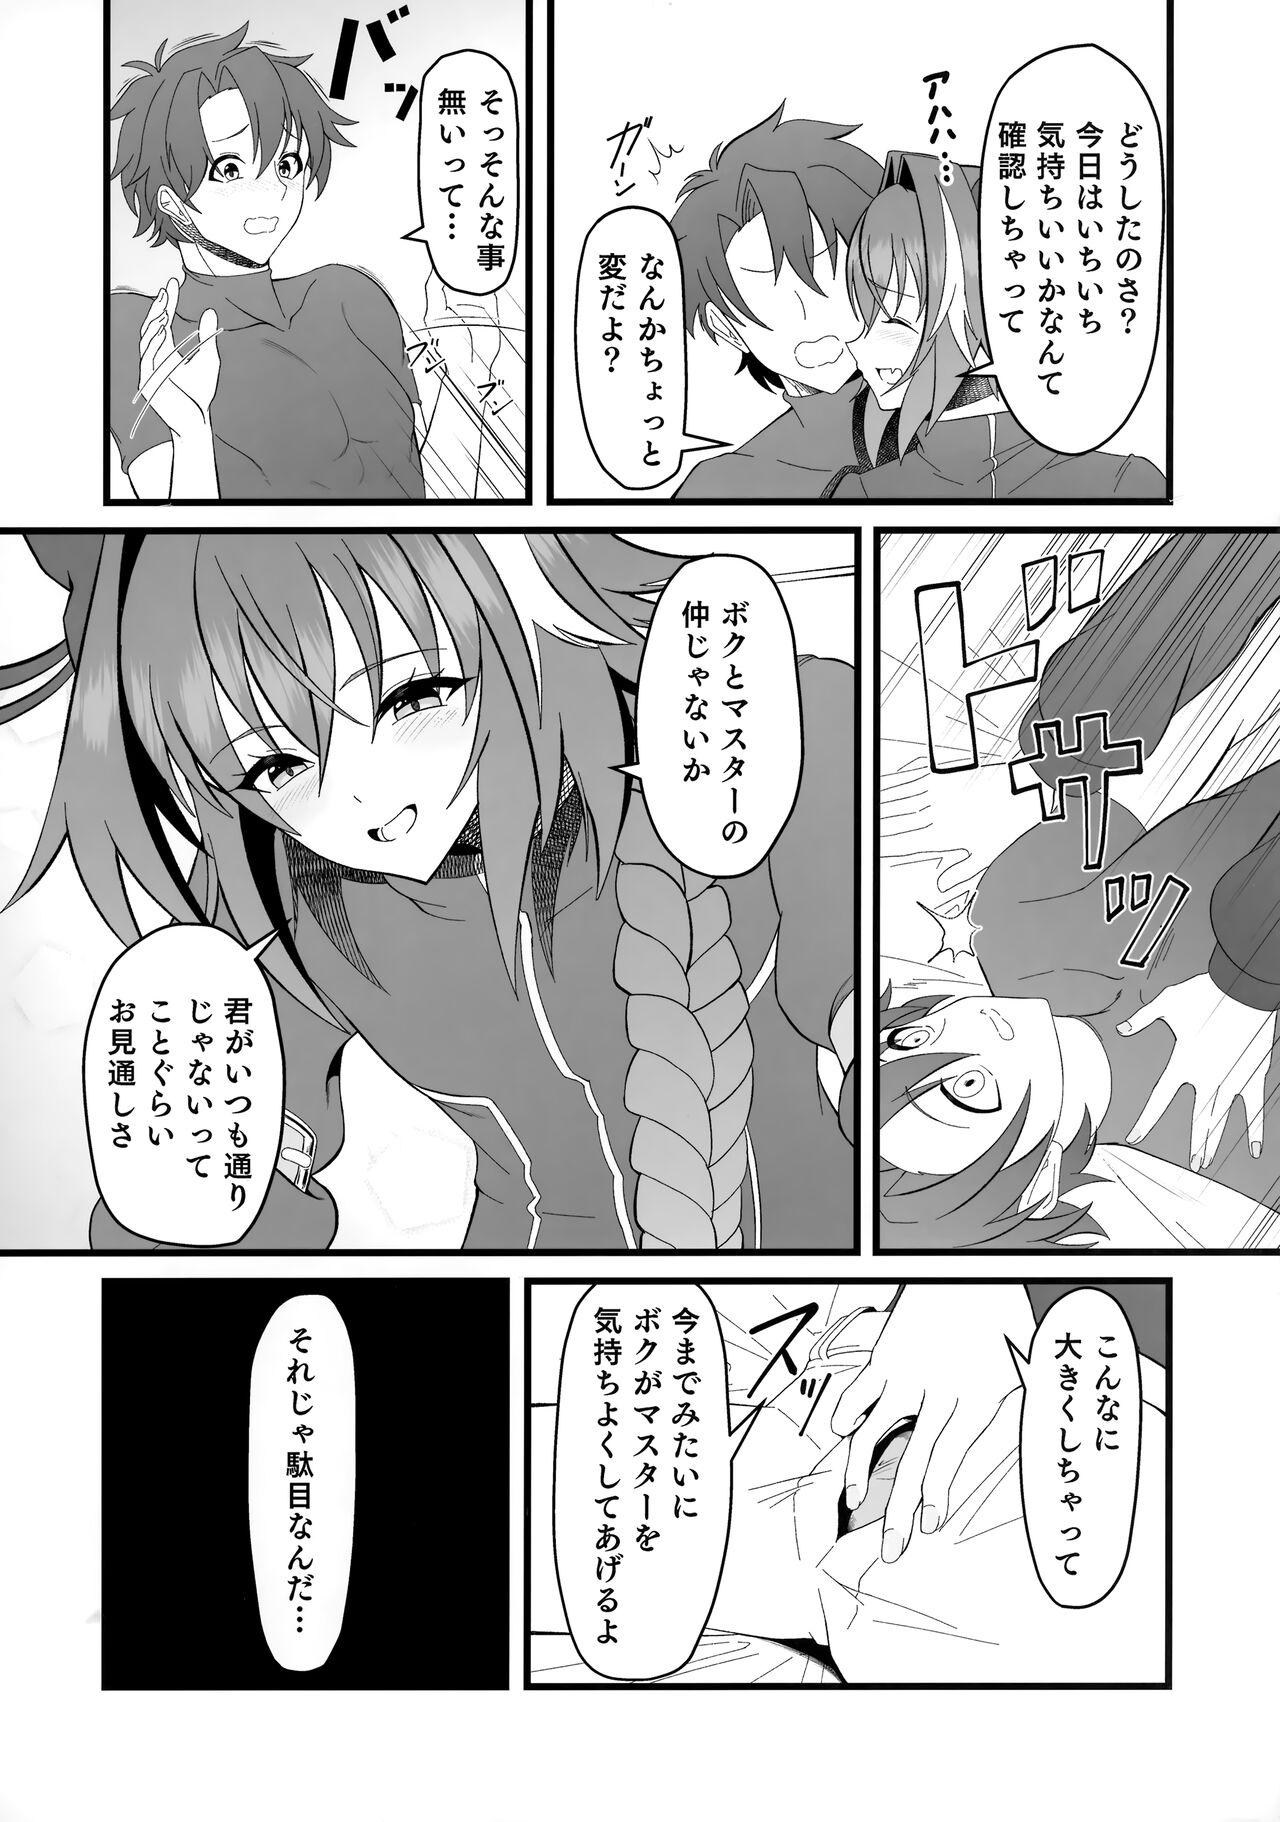 Sperm Kimi no Ichiban ni Naritakute - I wanted to be your number one. - Fate grand order Travesti - Page 7